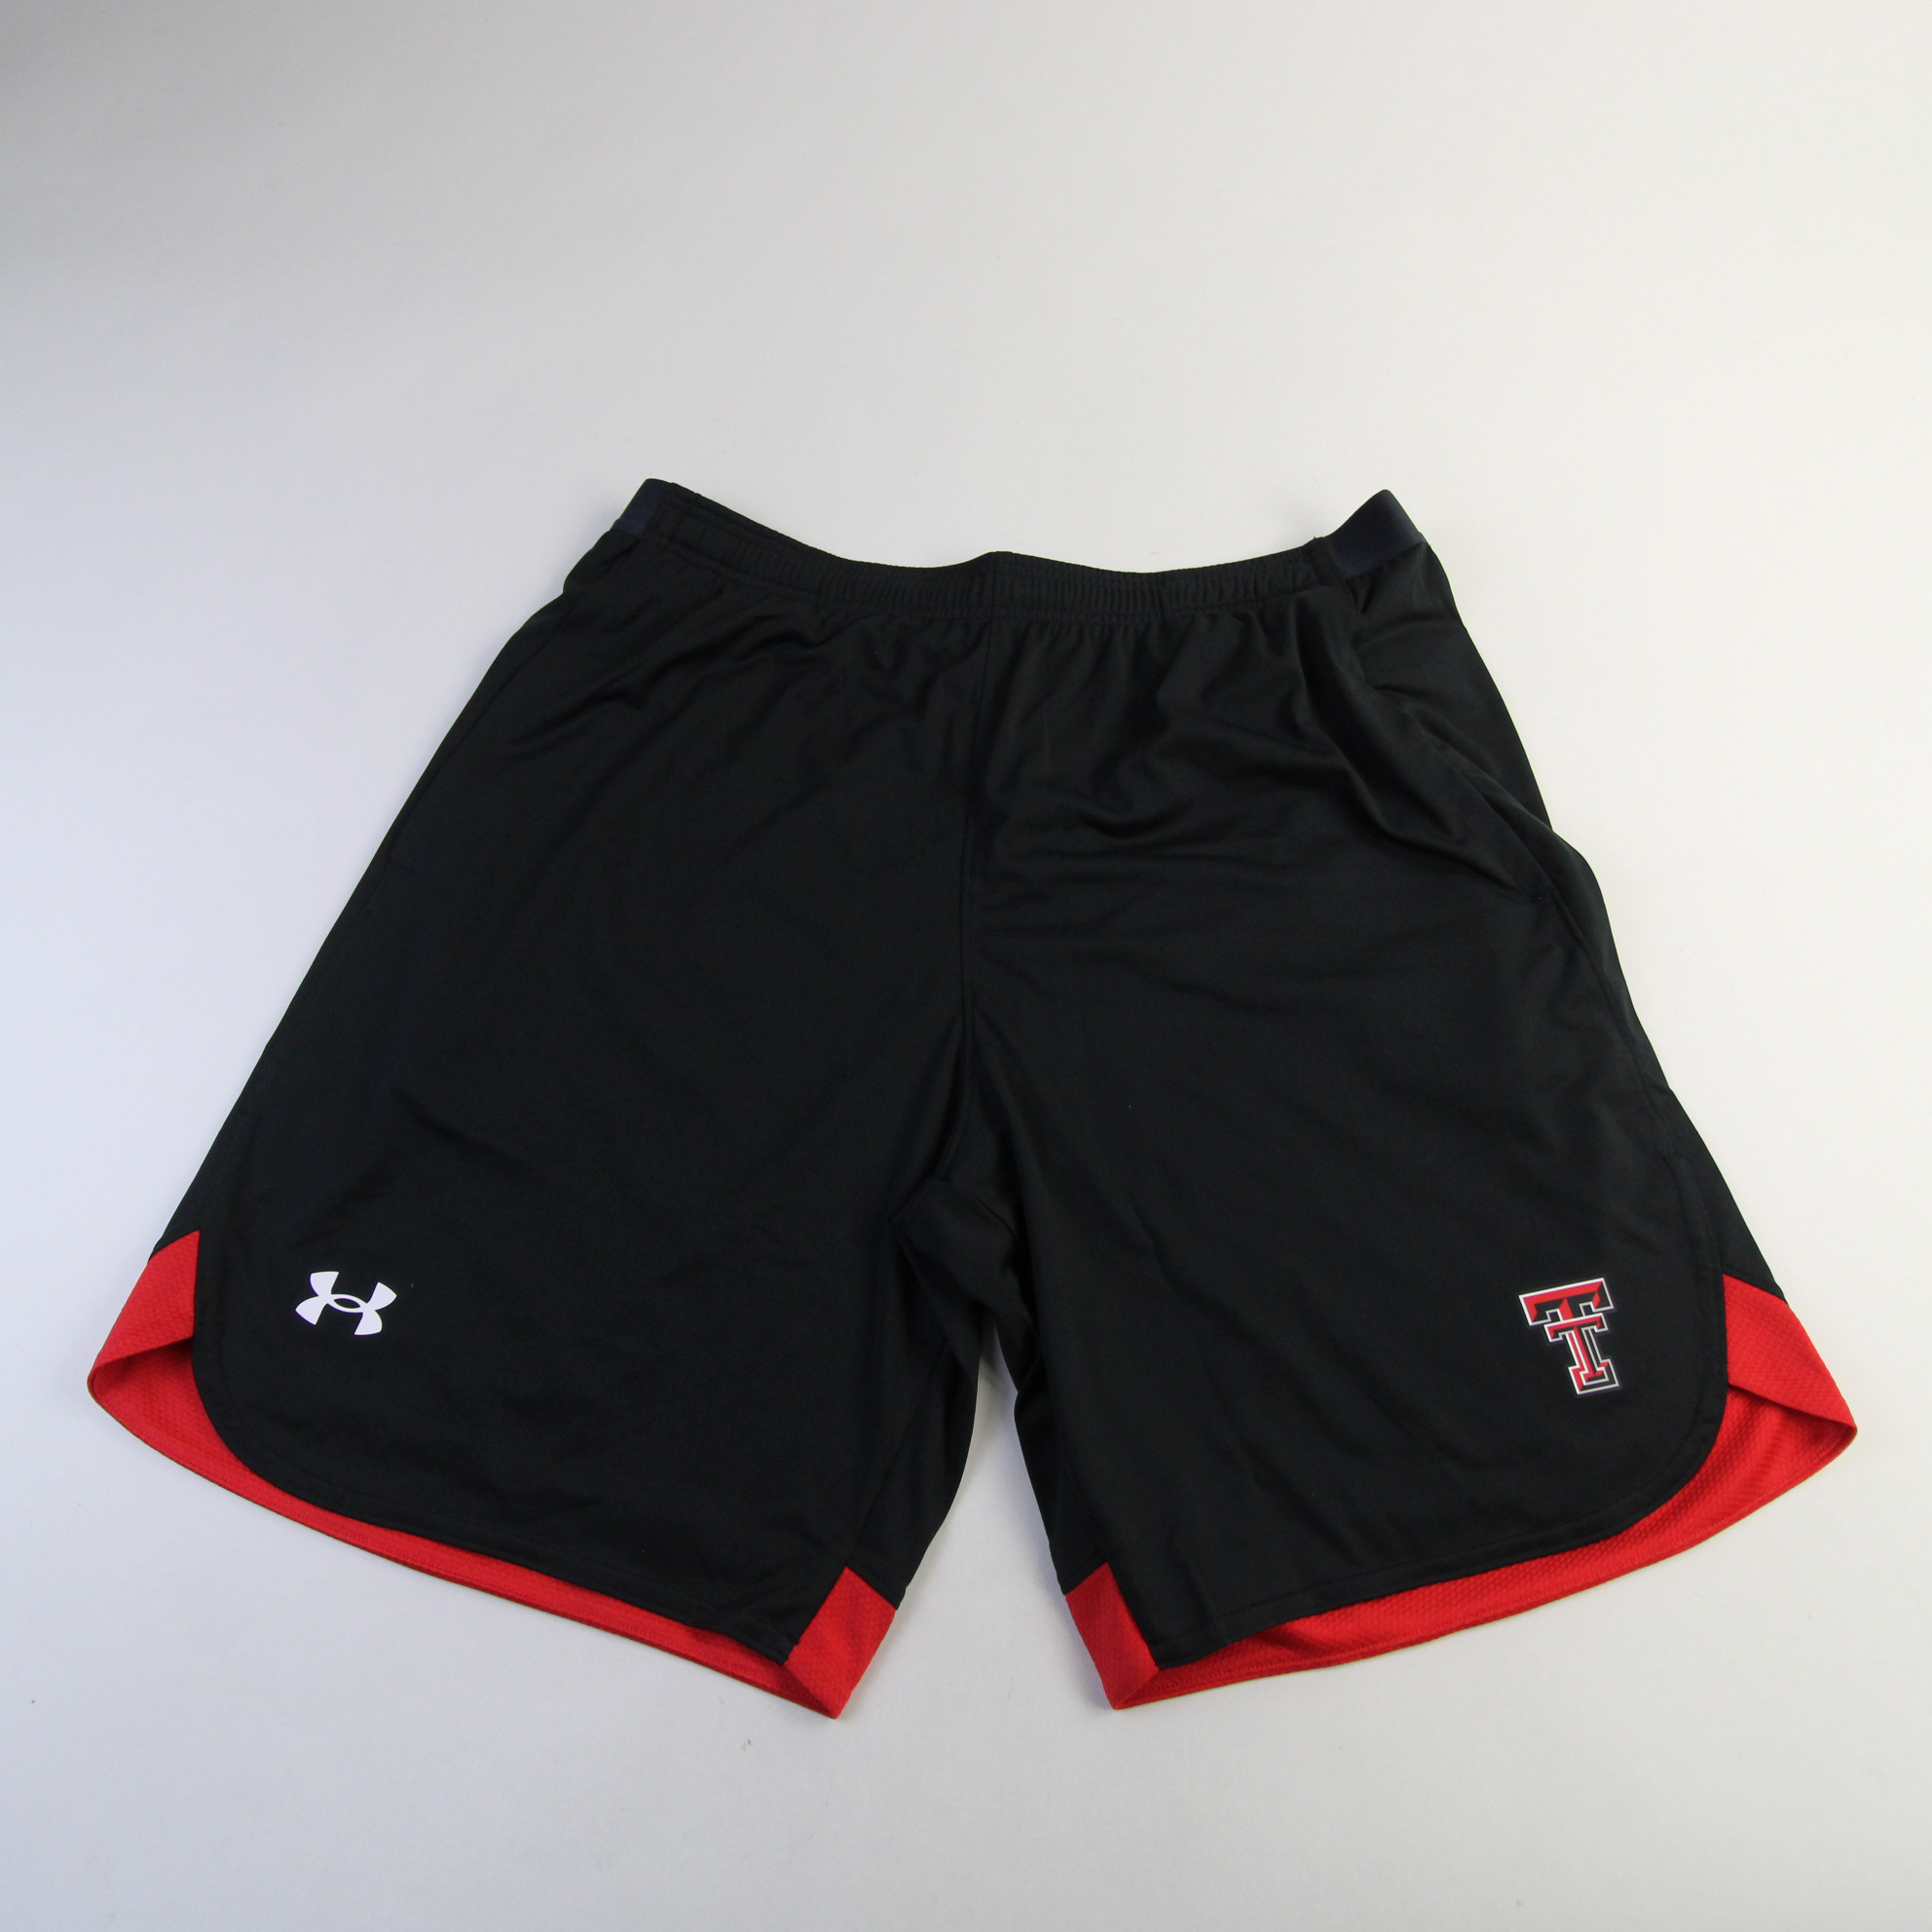 Texas Tech Red Raiders Under Armour Athletic Shorts Men's Black/Red New ...